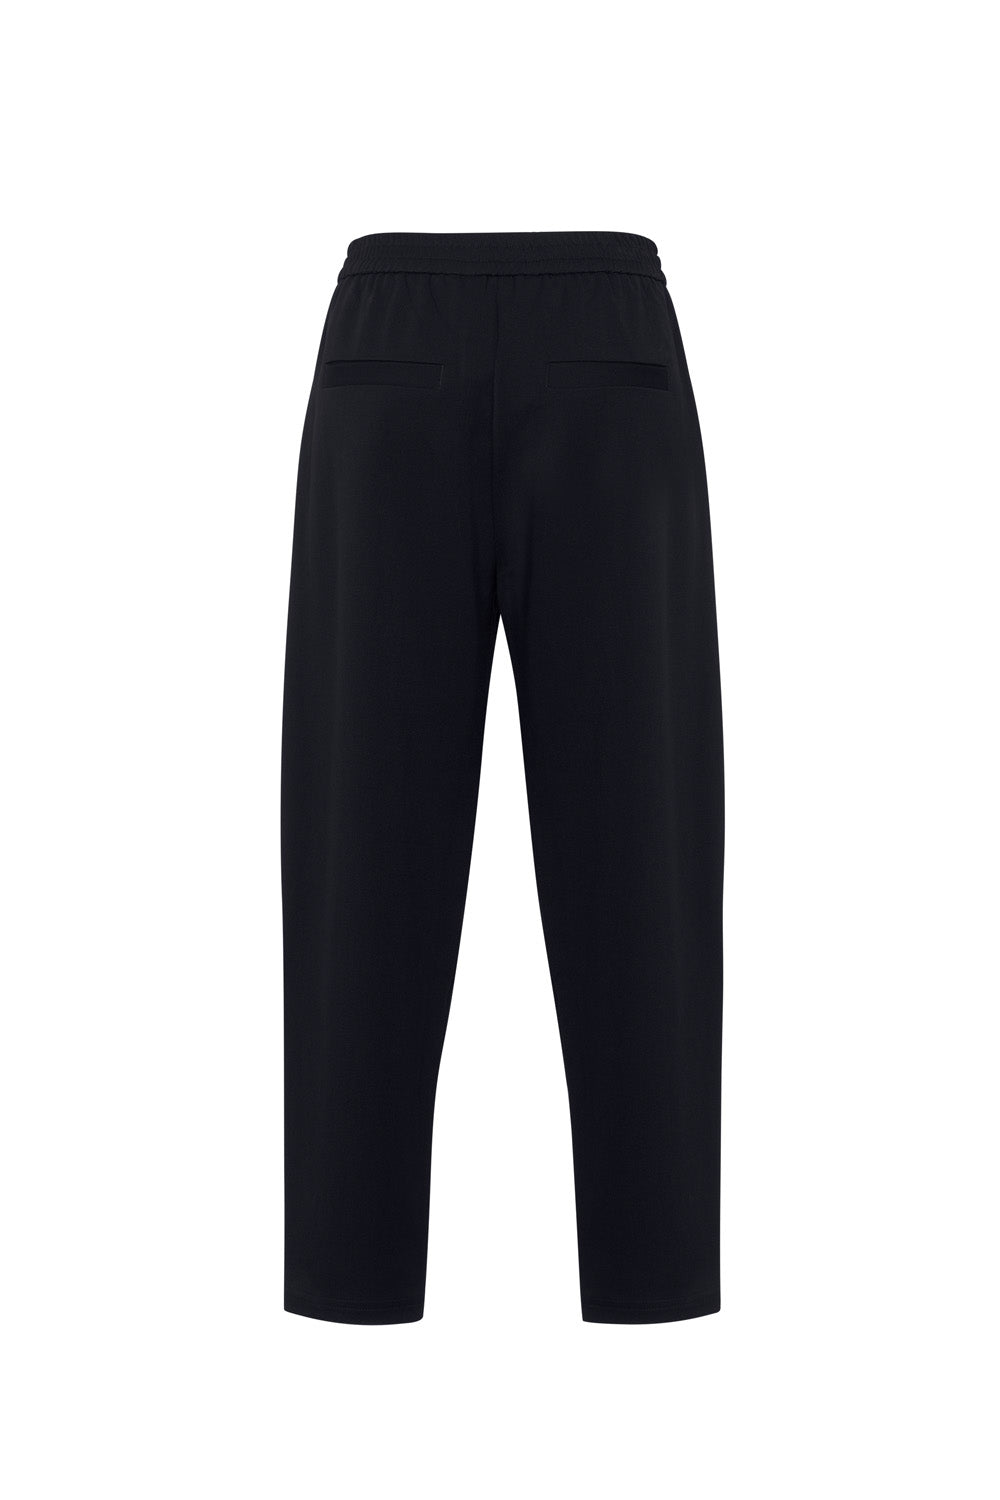 LOOBIE'S STORY BETHANY PANT - BLACK - THE VOGUE STORE